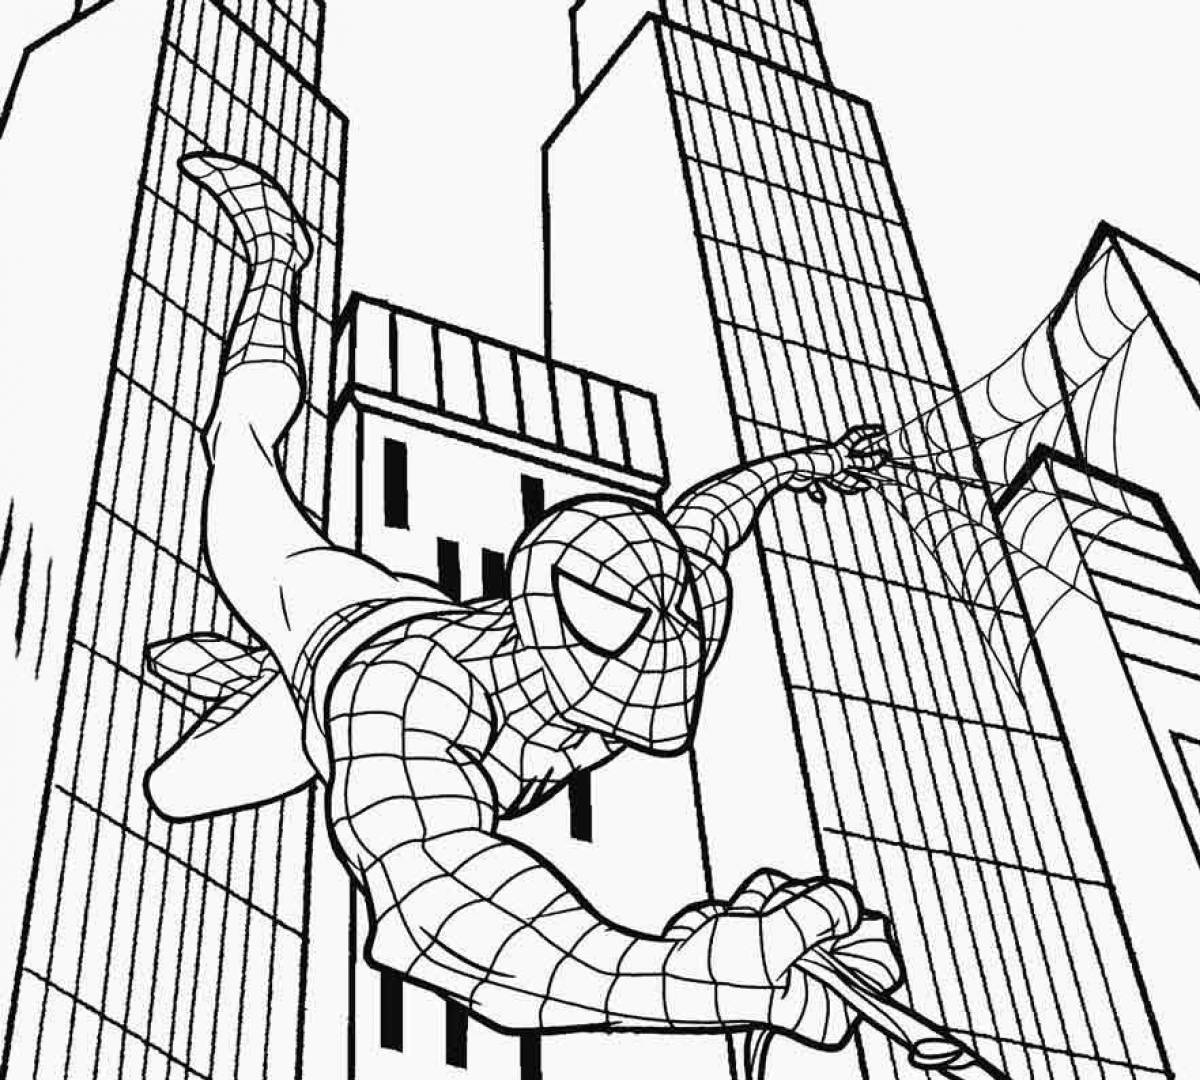 Spiderman's gorgeous coloring book